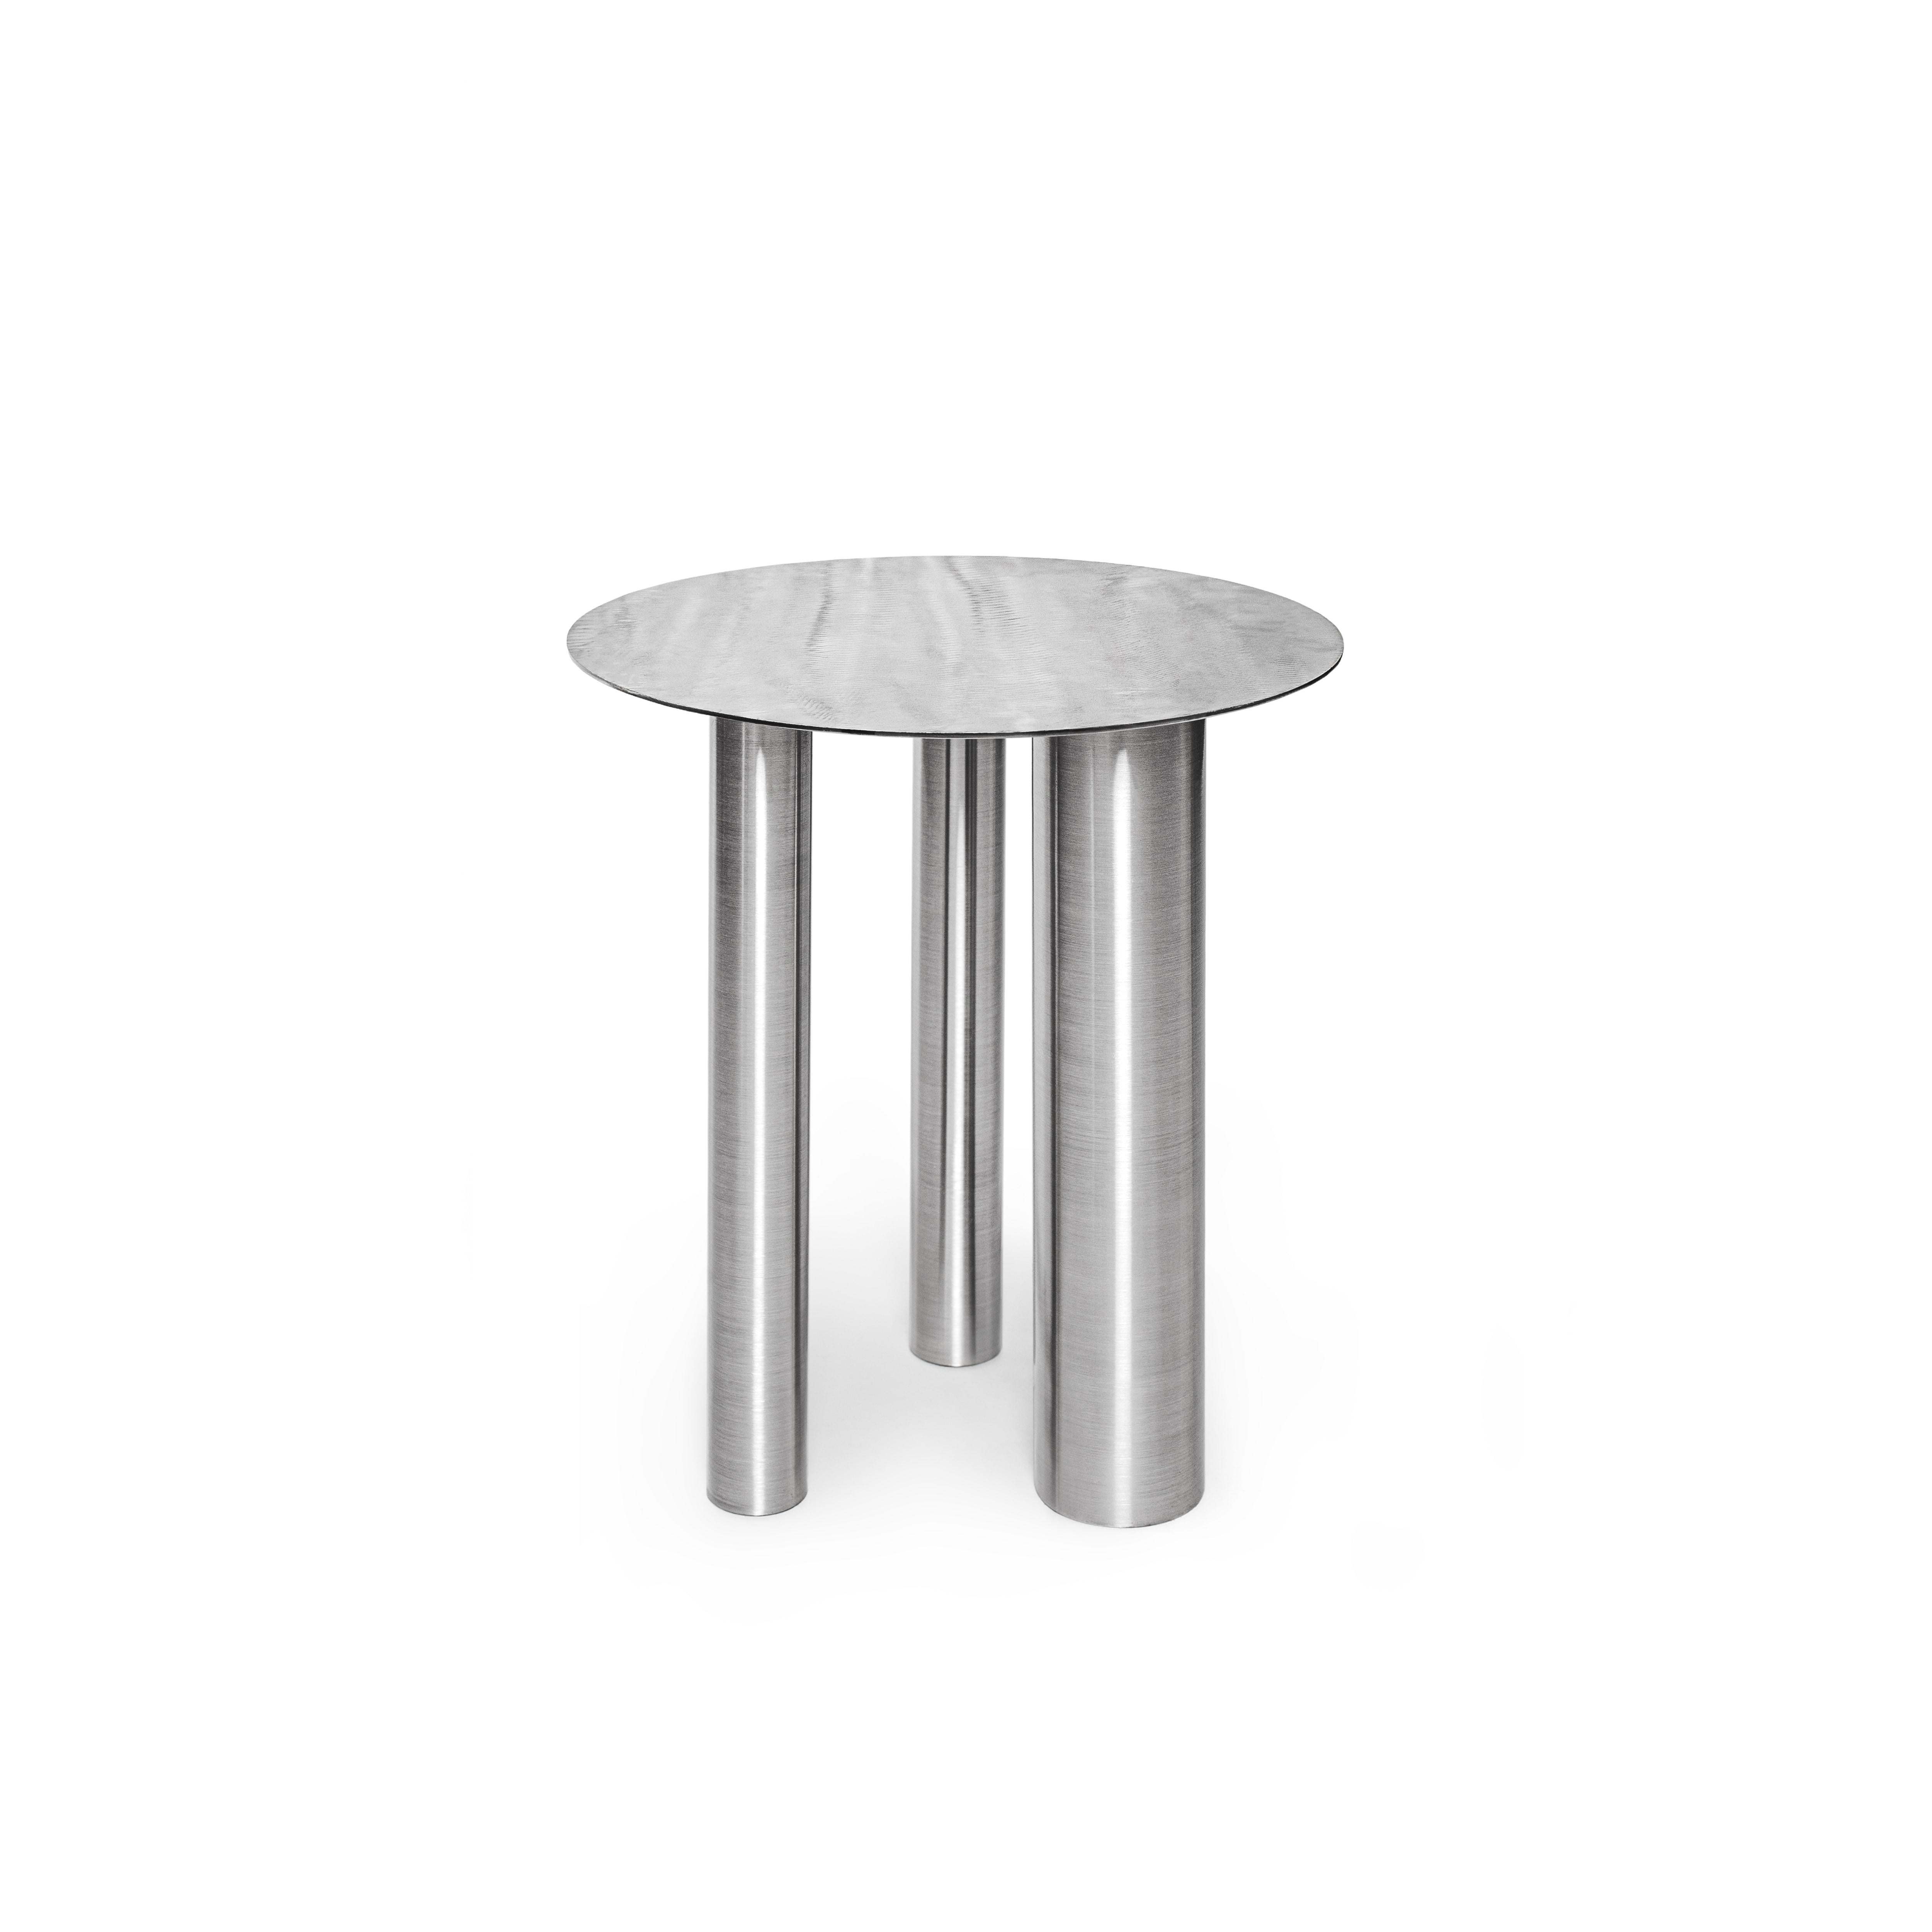 Contemporary Set of Two Modern Coffee Tables Brandt CS1 made of Stainless Steel by NOOM